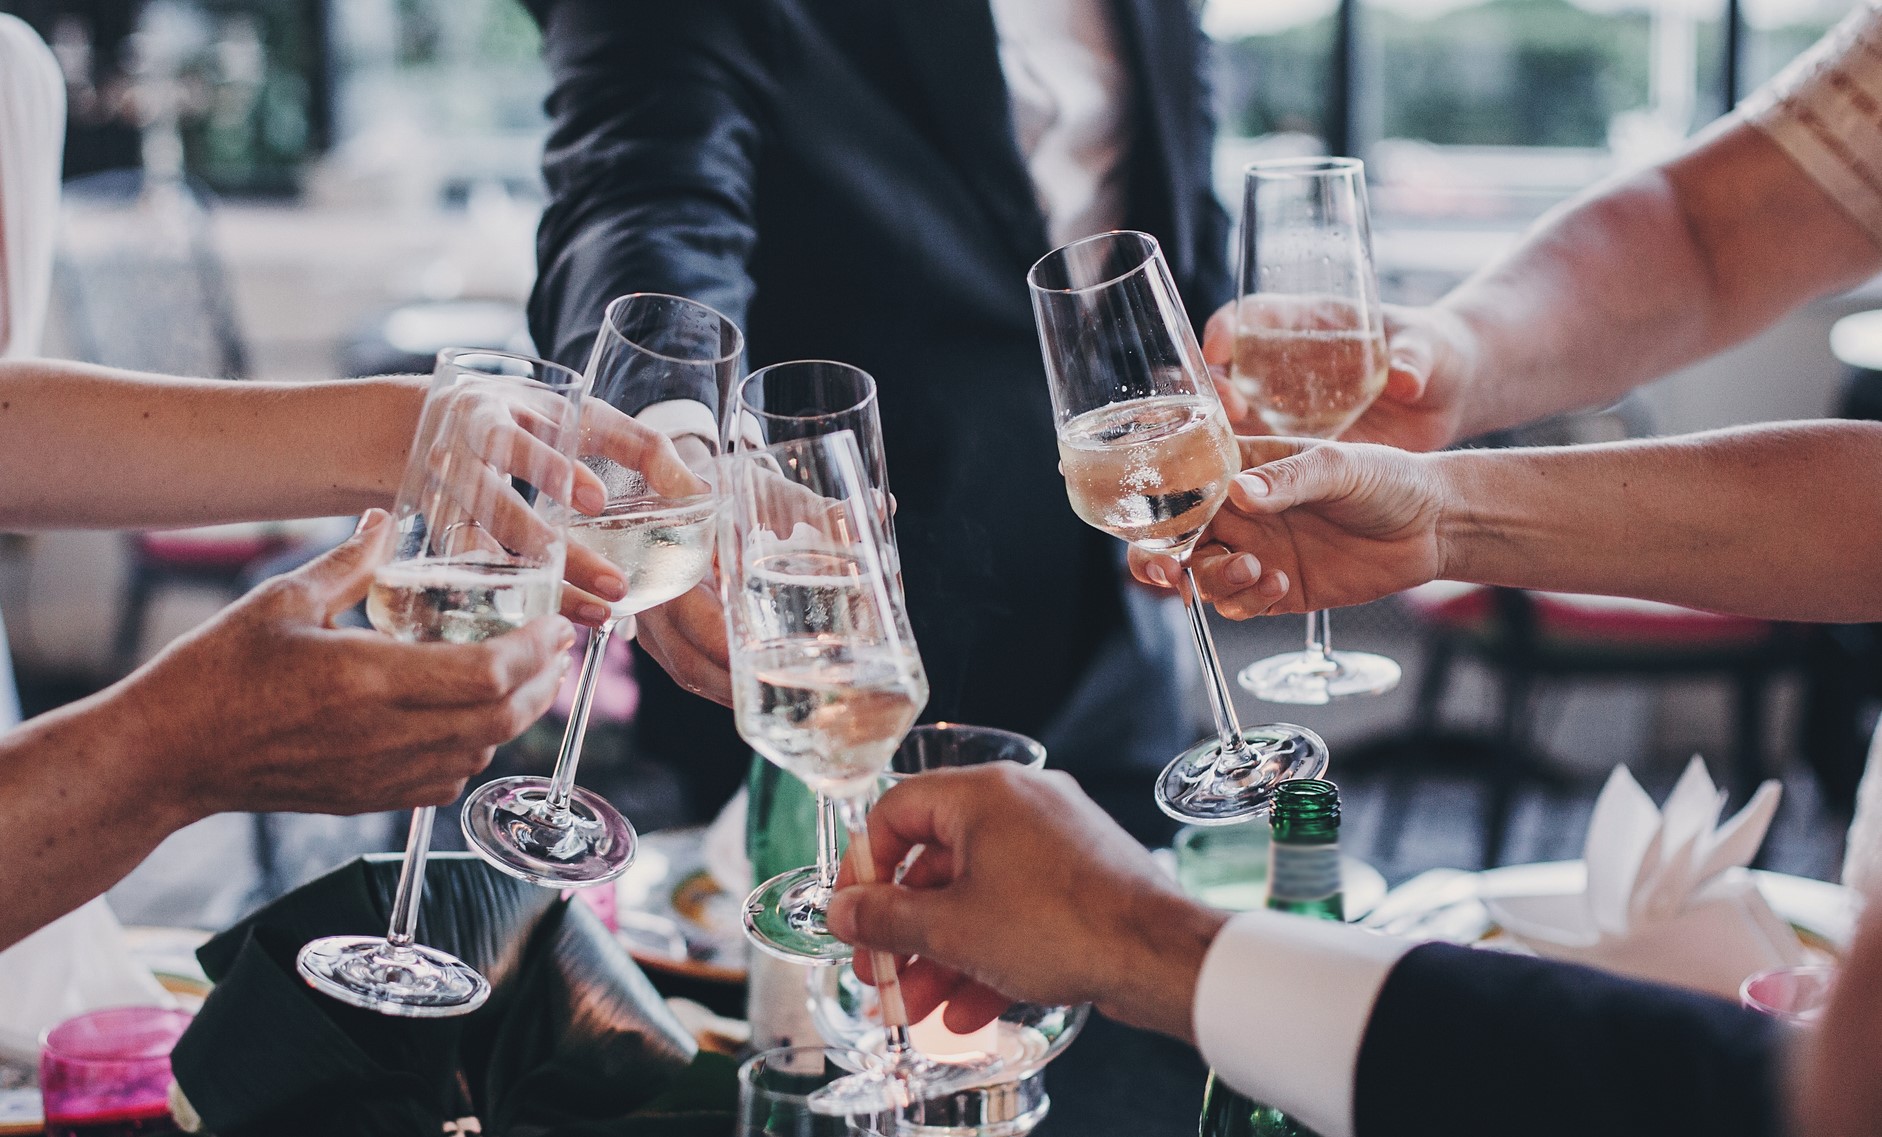 Group of people holding champagne glasses and toasting at wedding reception outdoors in the evening. Family and friends clinking glasses and cheering with alcohol at delicious feast celebration